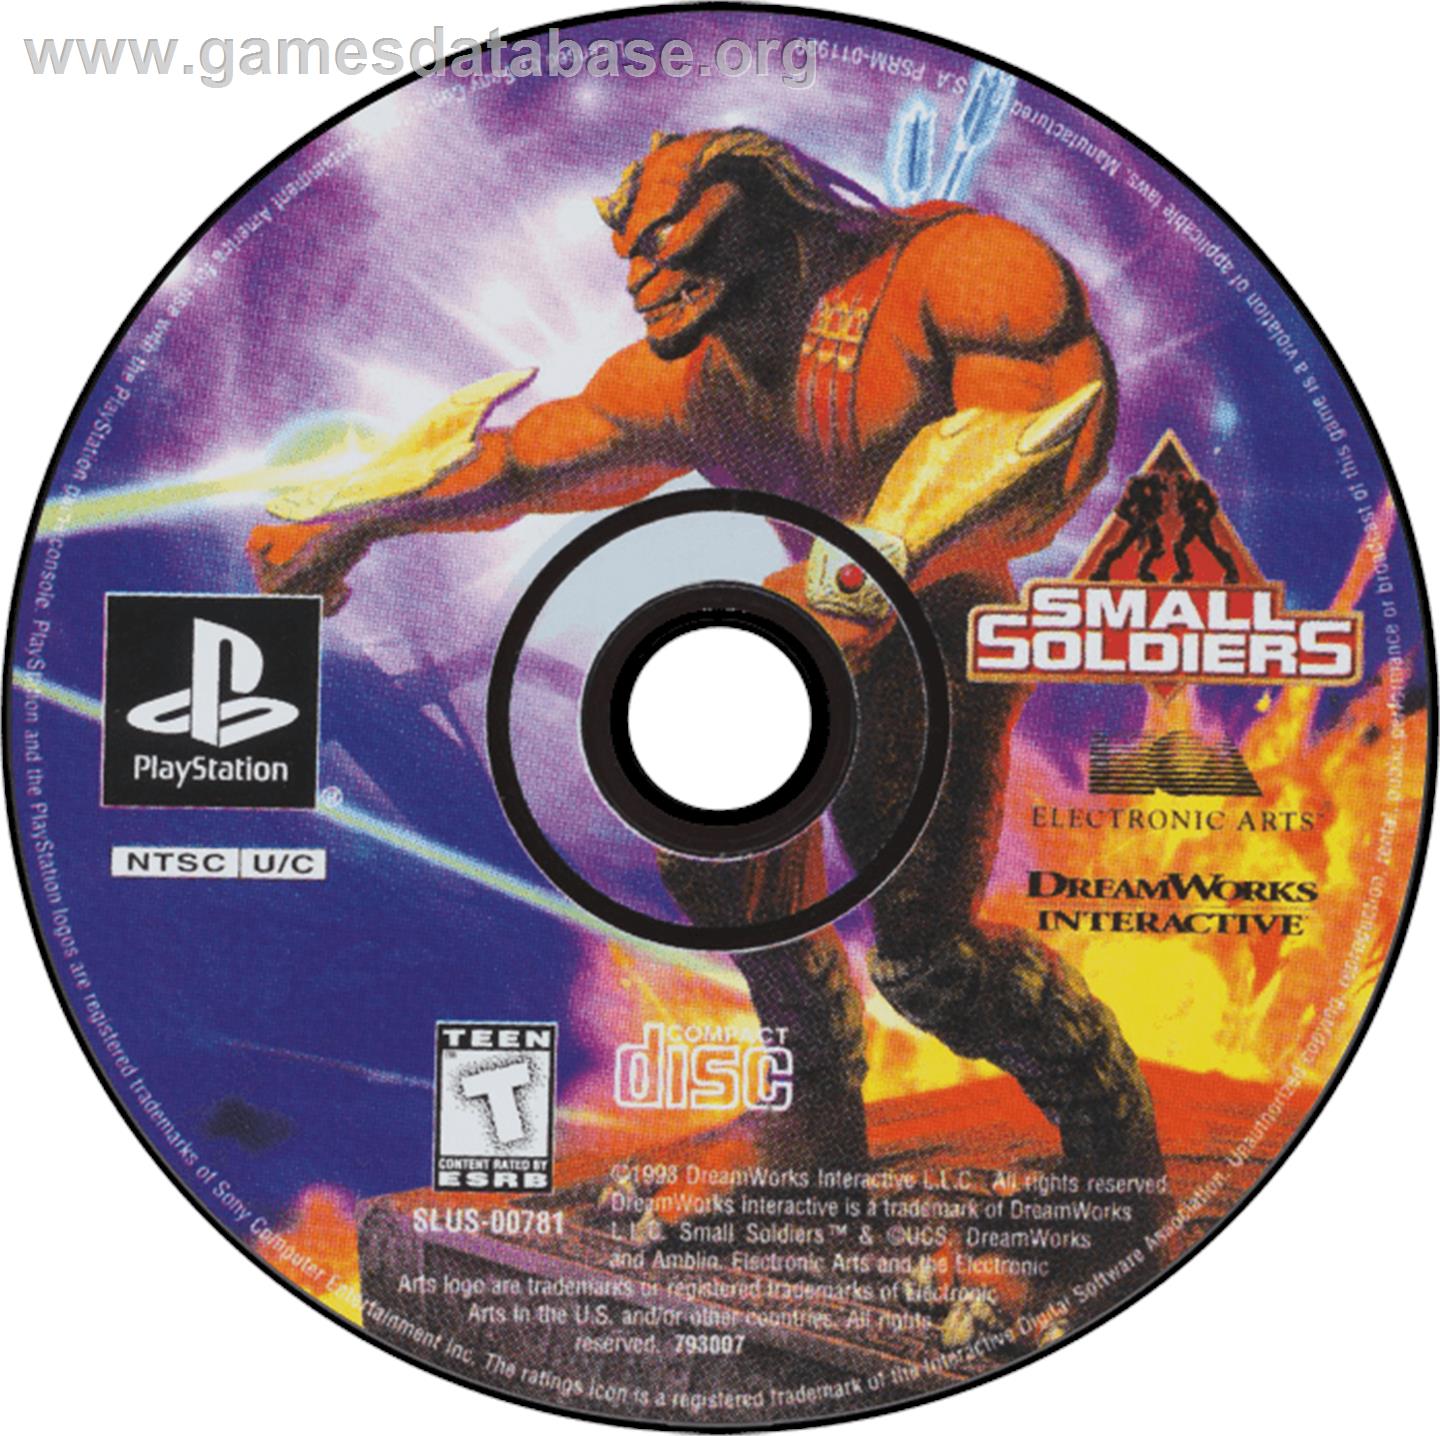 Small Soldiers - Sony Playstation - Artwork - Disc